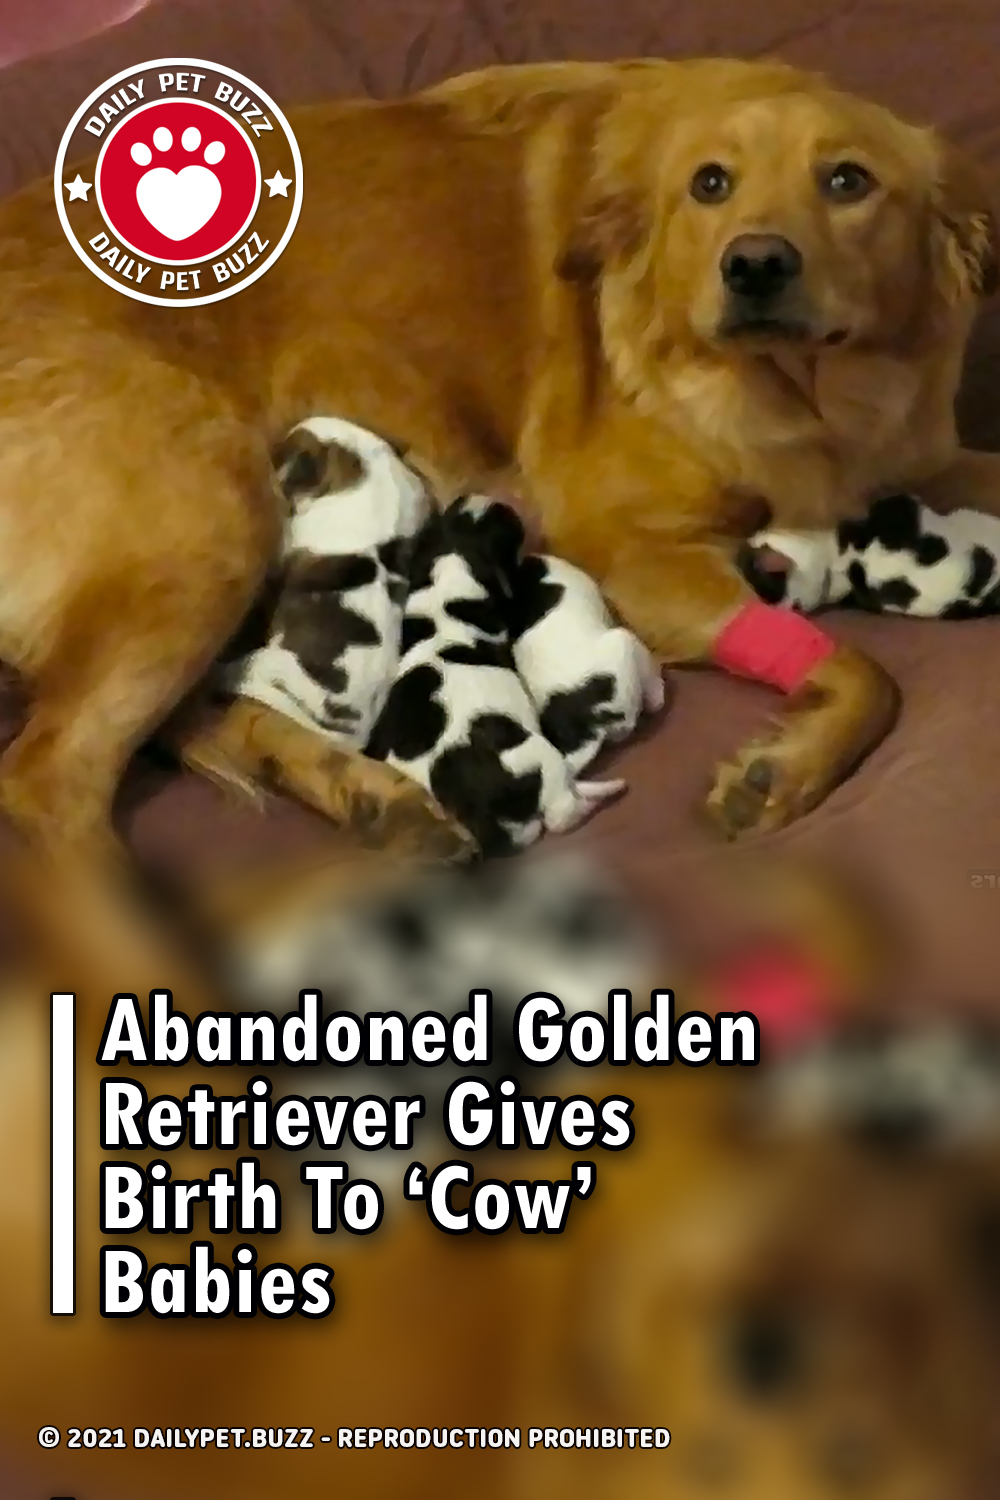 Abandoned Golden Retriever Gives Birth To ‘Cow’ Babies